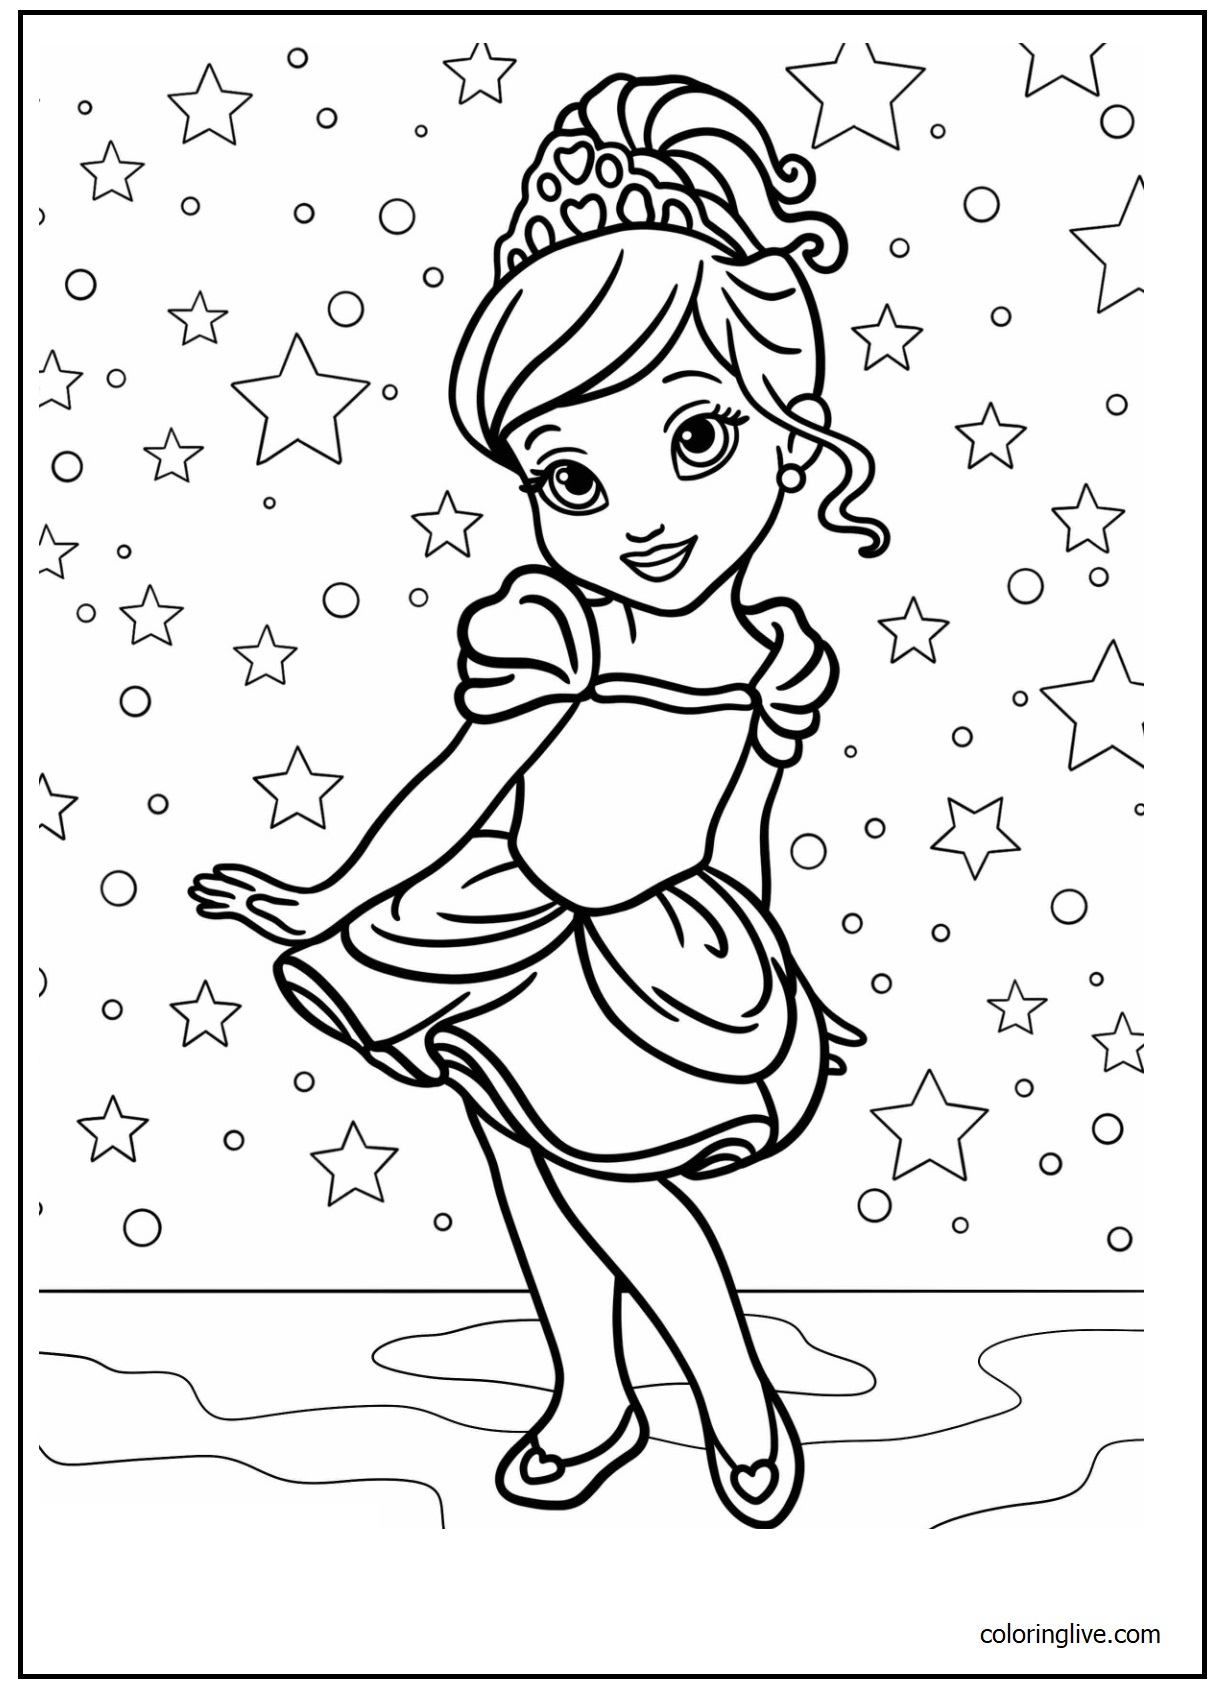 Printable Pretty Baby Princess Coloring Page for kids.